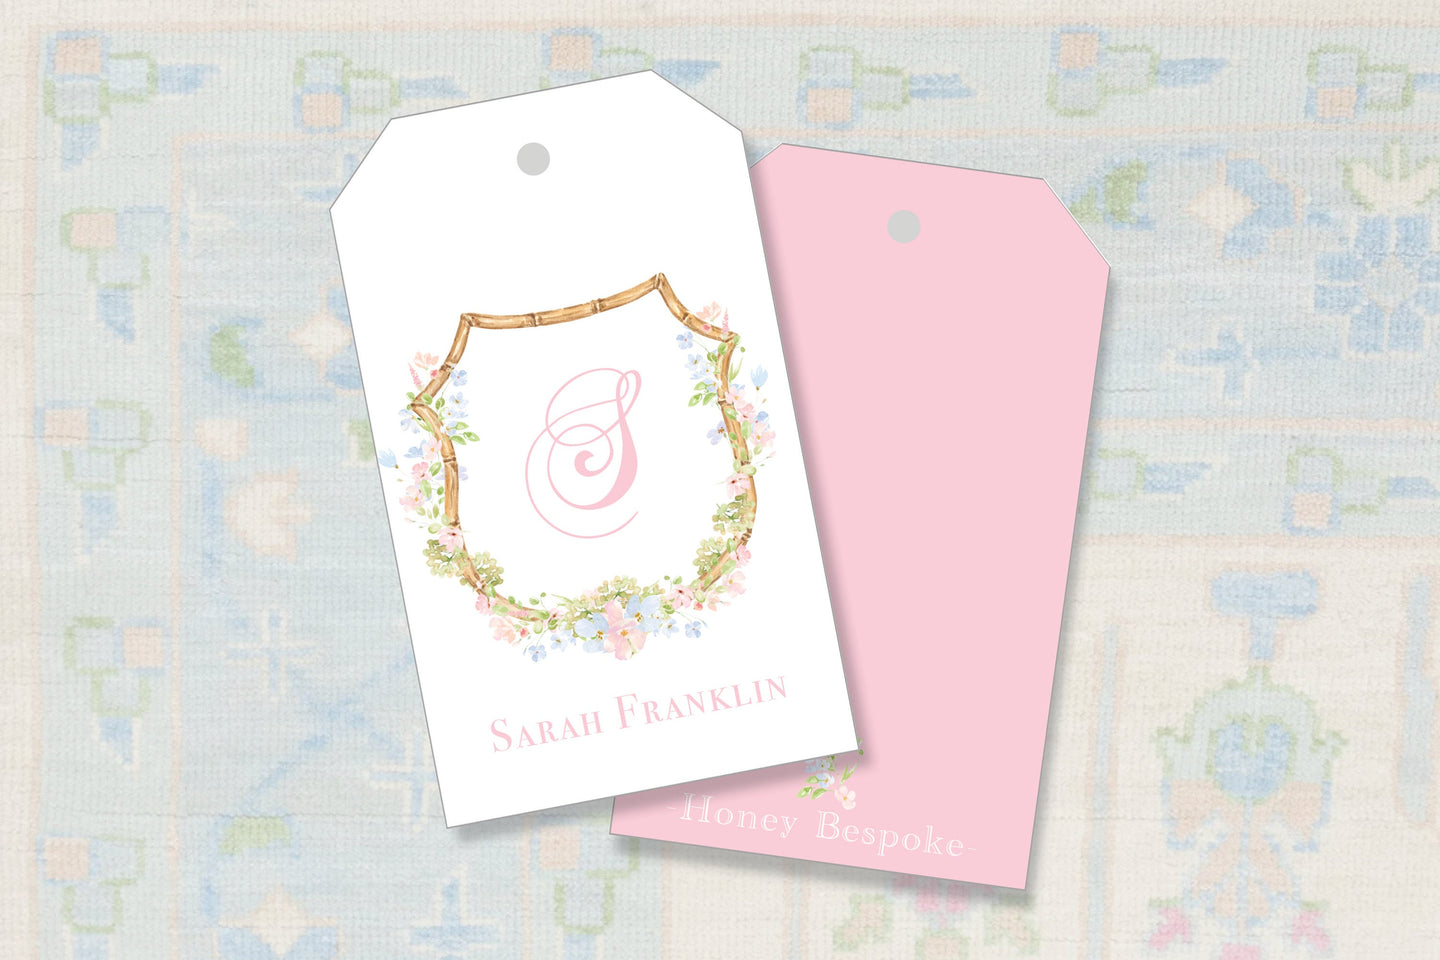 Watercolor Crest Gift Tag / Personalized Elegant Gift Tag / Printable Gift Tags / Monogramed Gift Tag / Watercolor Bamboo Crest